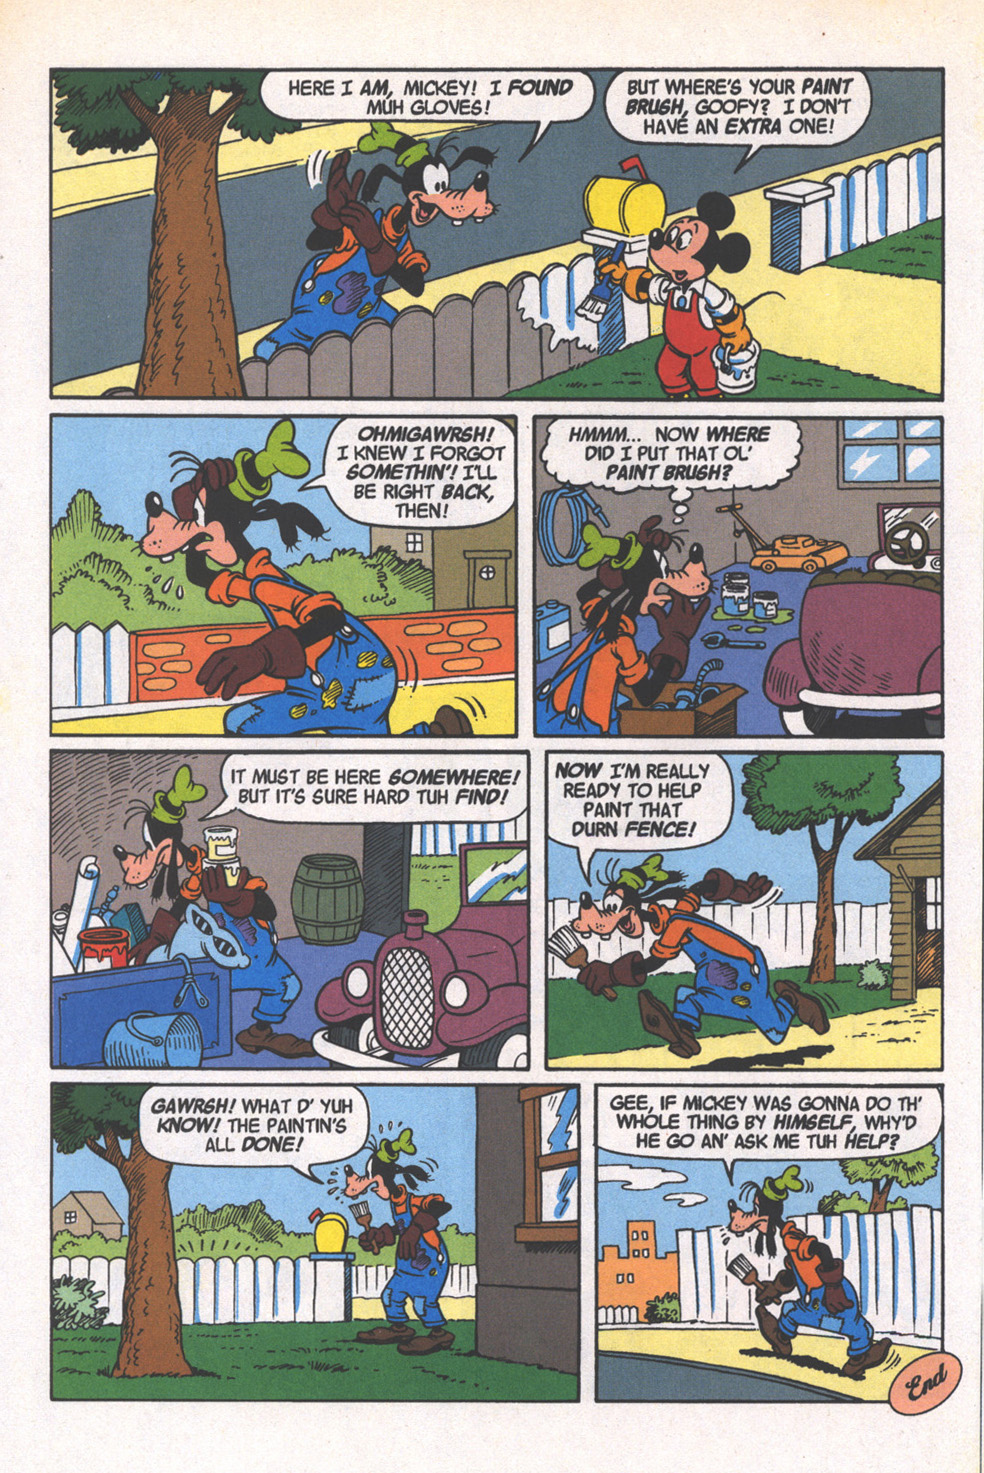 Mickey Mouse Adventures #3 #3 - English 34